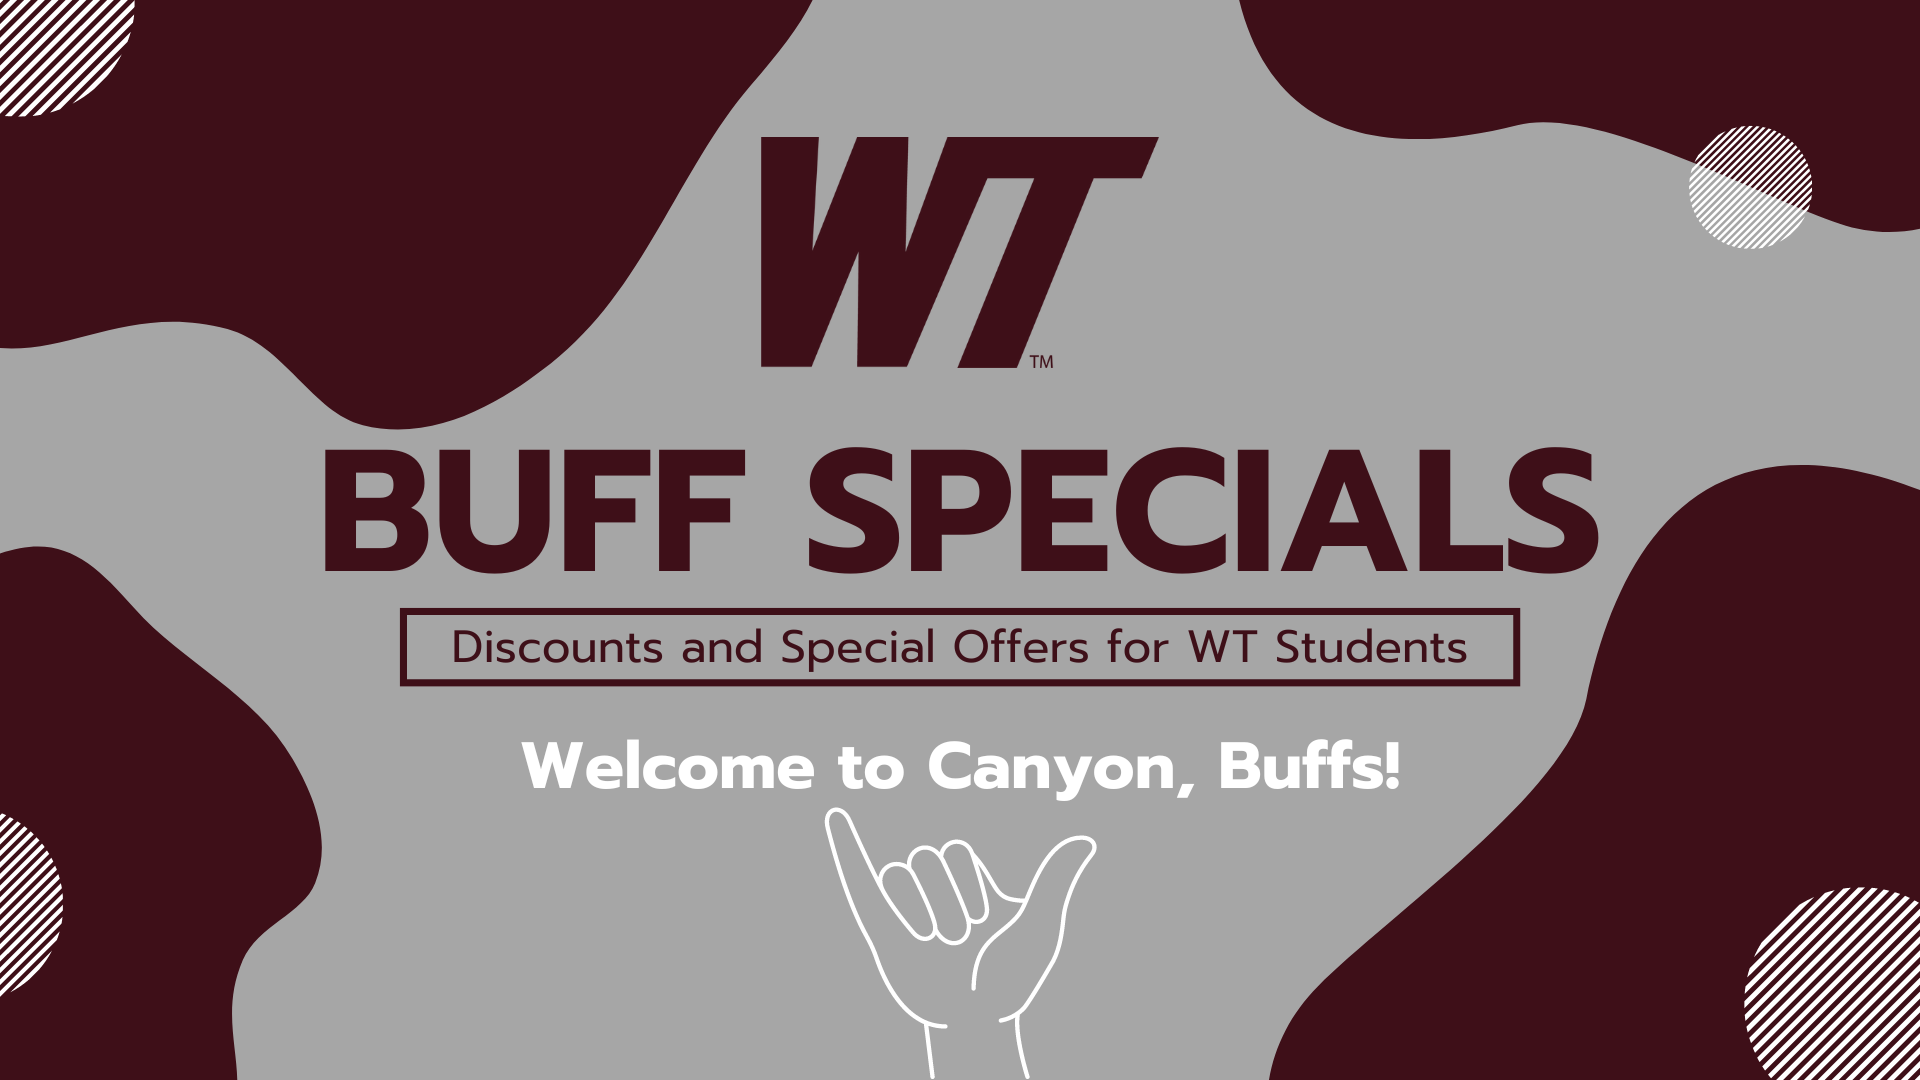 https://canyonmainstreet.org/wp-content/uploads/2020/07/BUFF-SPECIALS-FB-Event.png